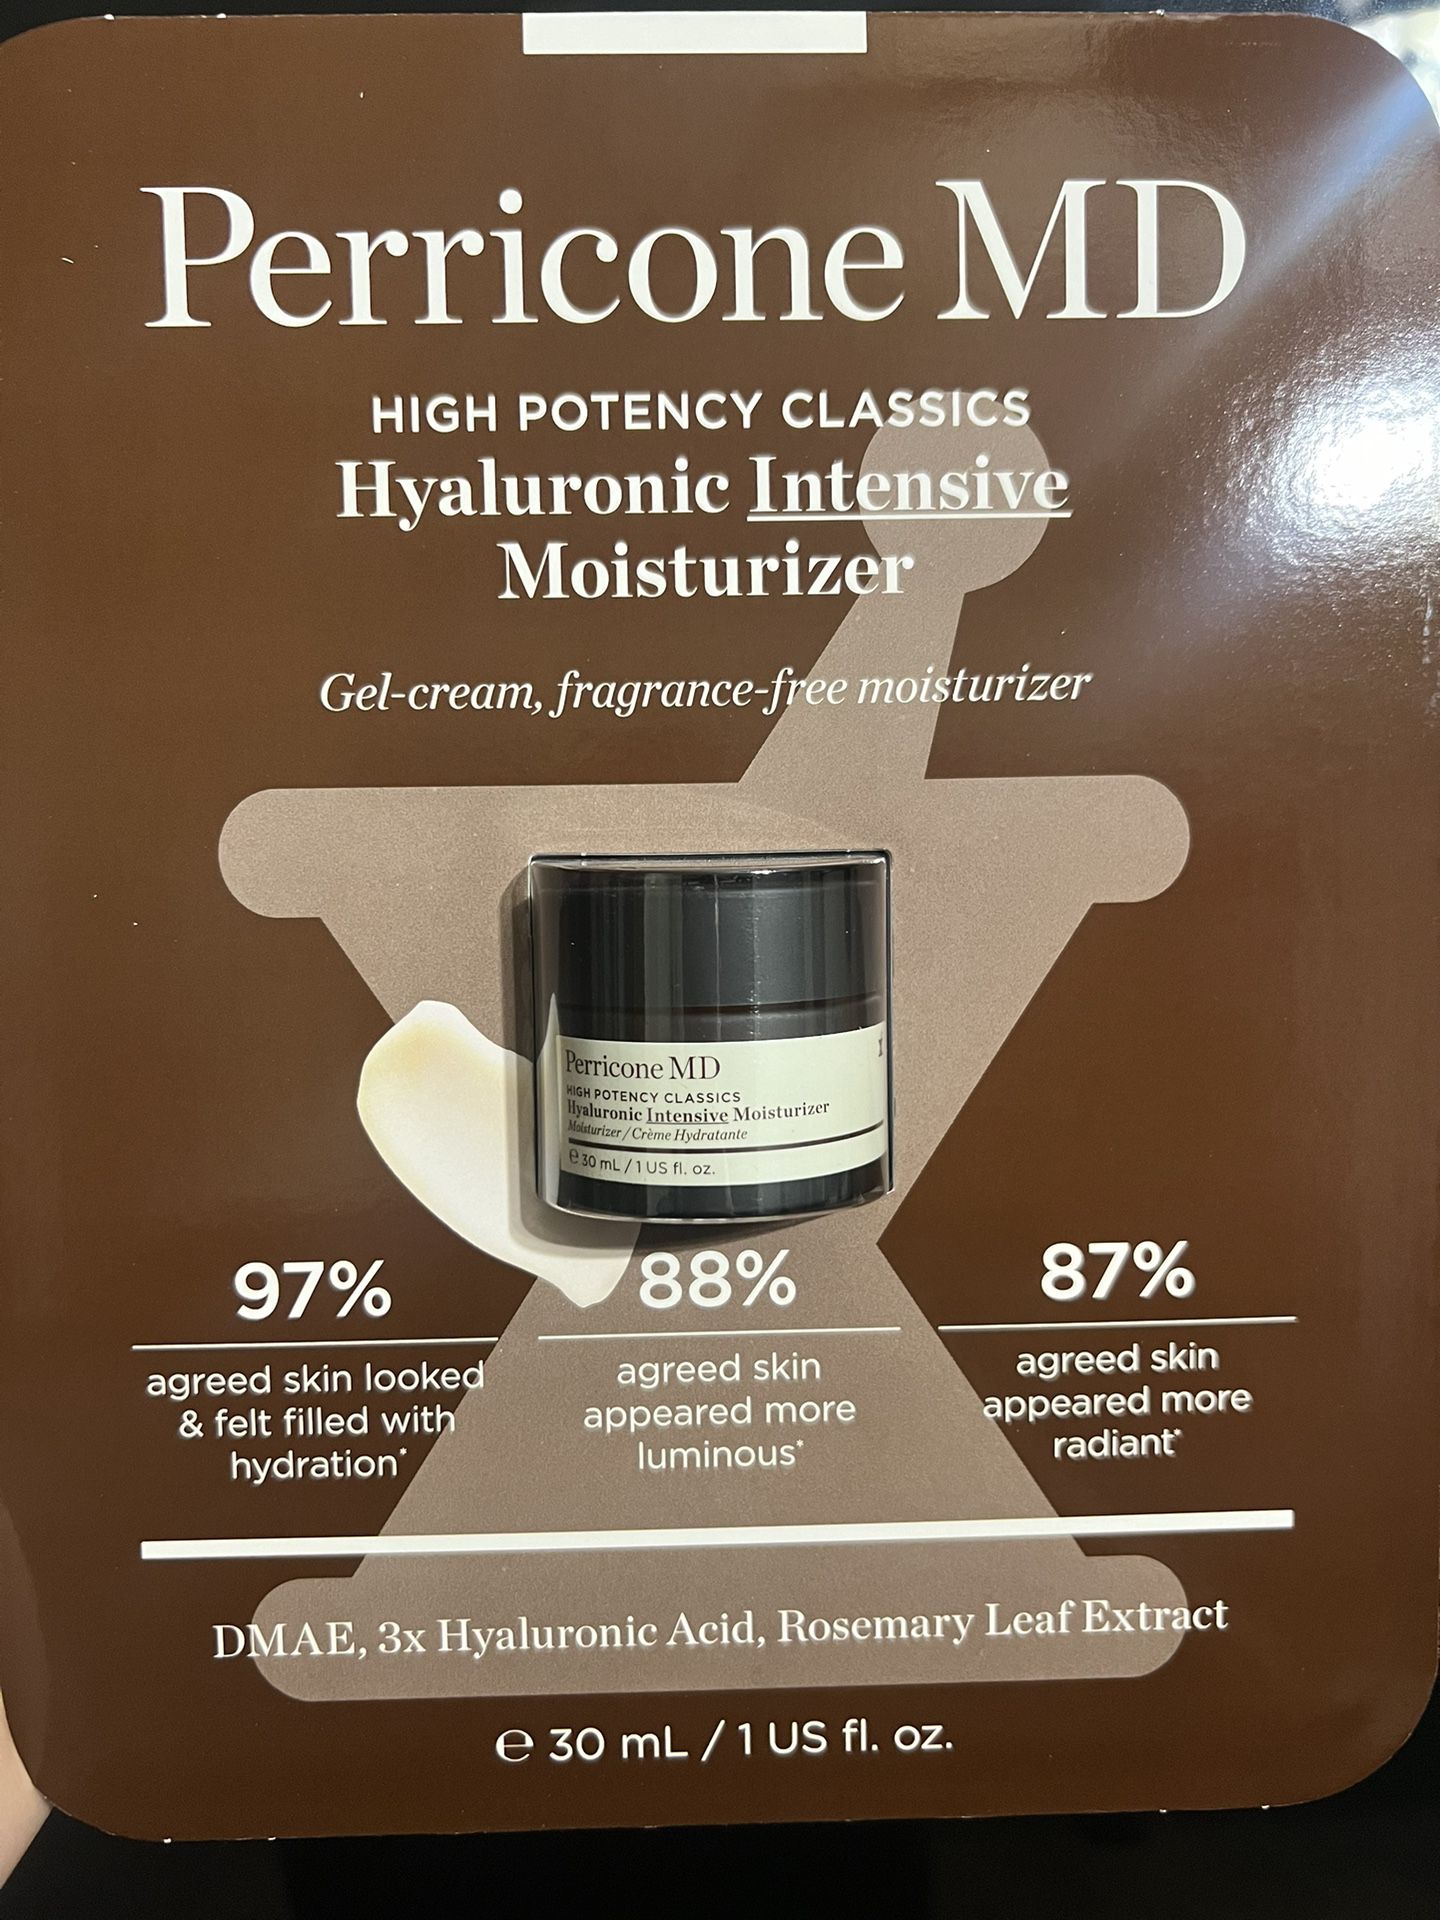 Perricone MD Hyaluronic Intensive Moisturizer